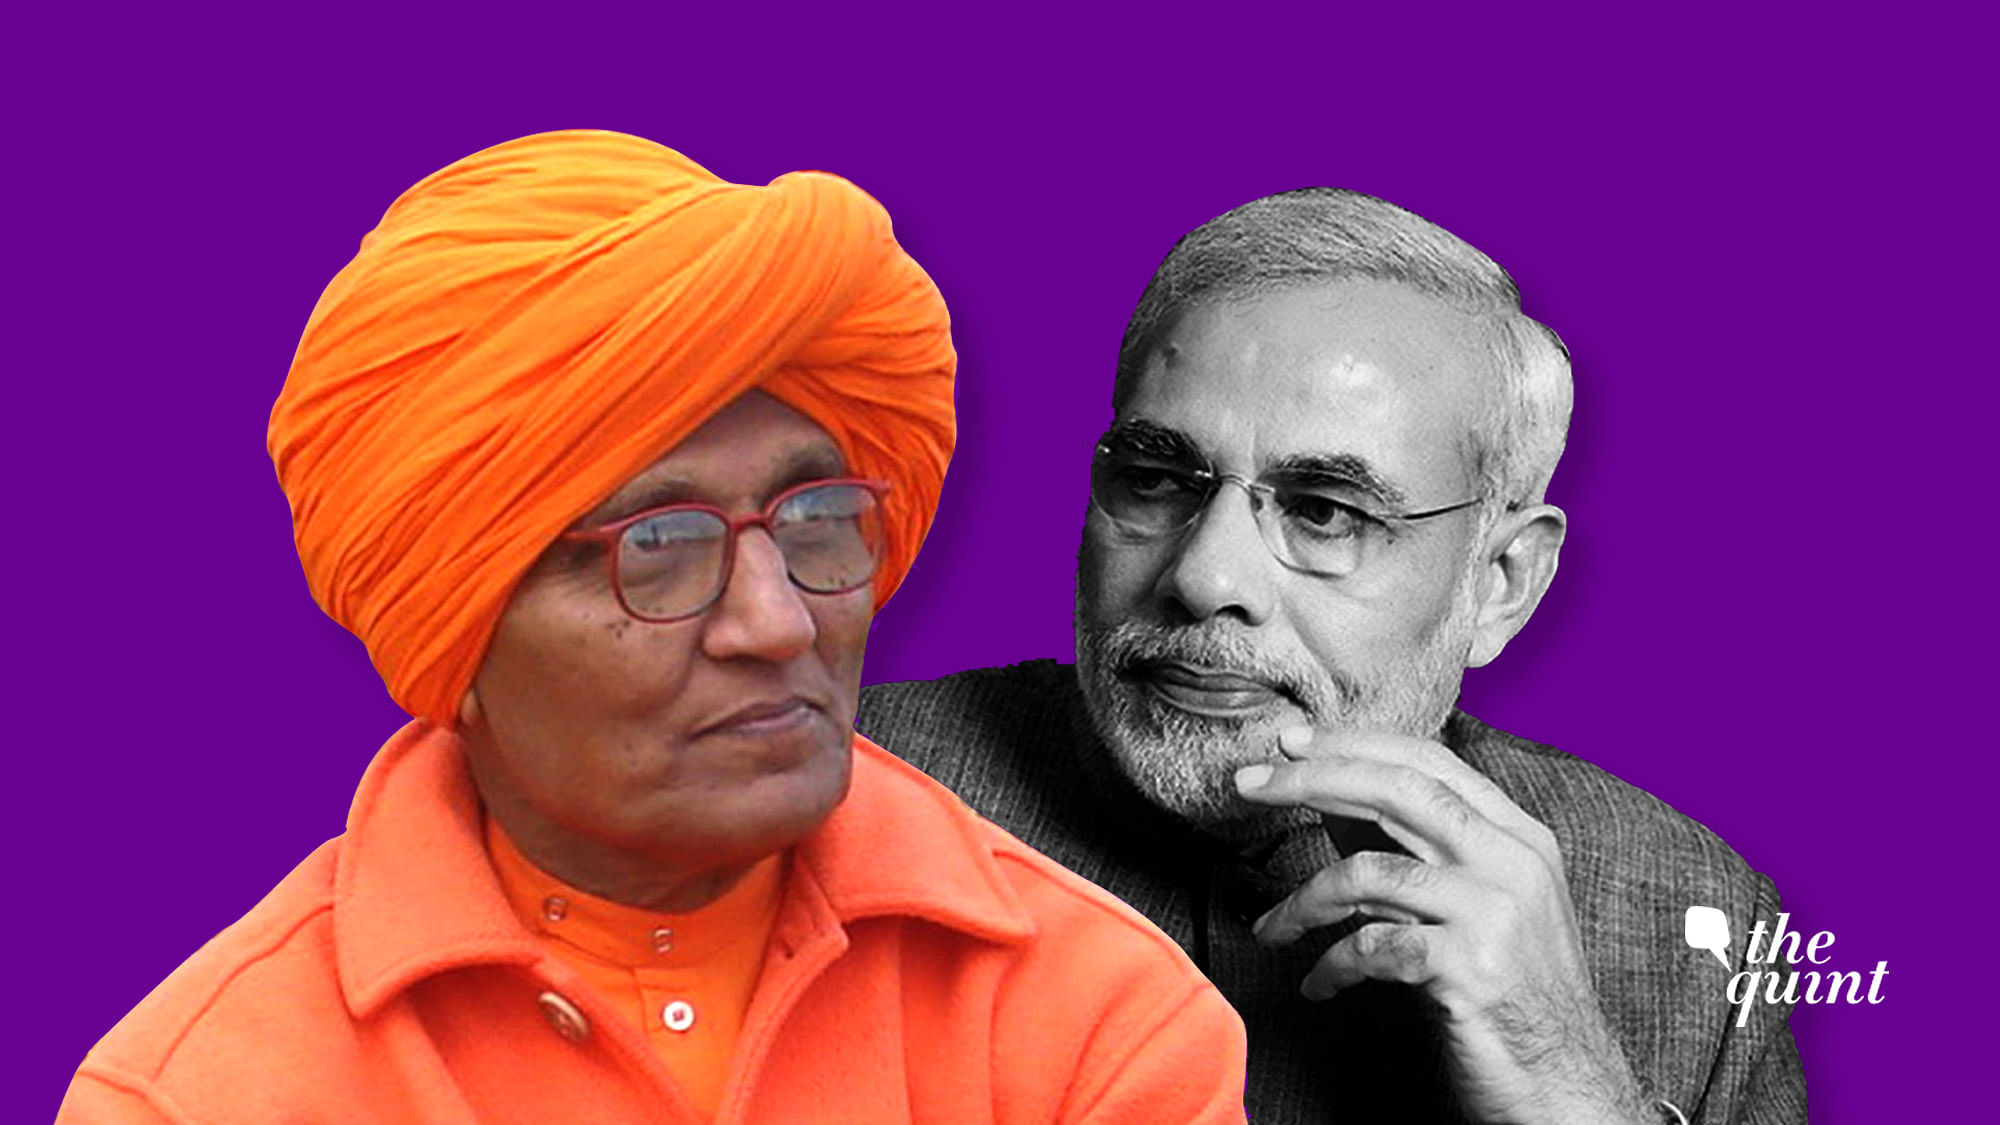 Exclusive: Days after being attacked by mob, Swami Agnivesh want to know: “Why is PM Modi silent on lynchings?”